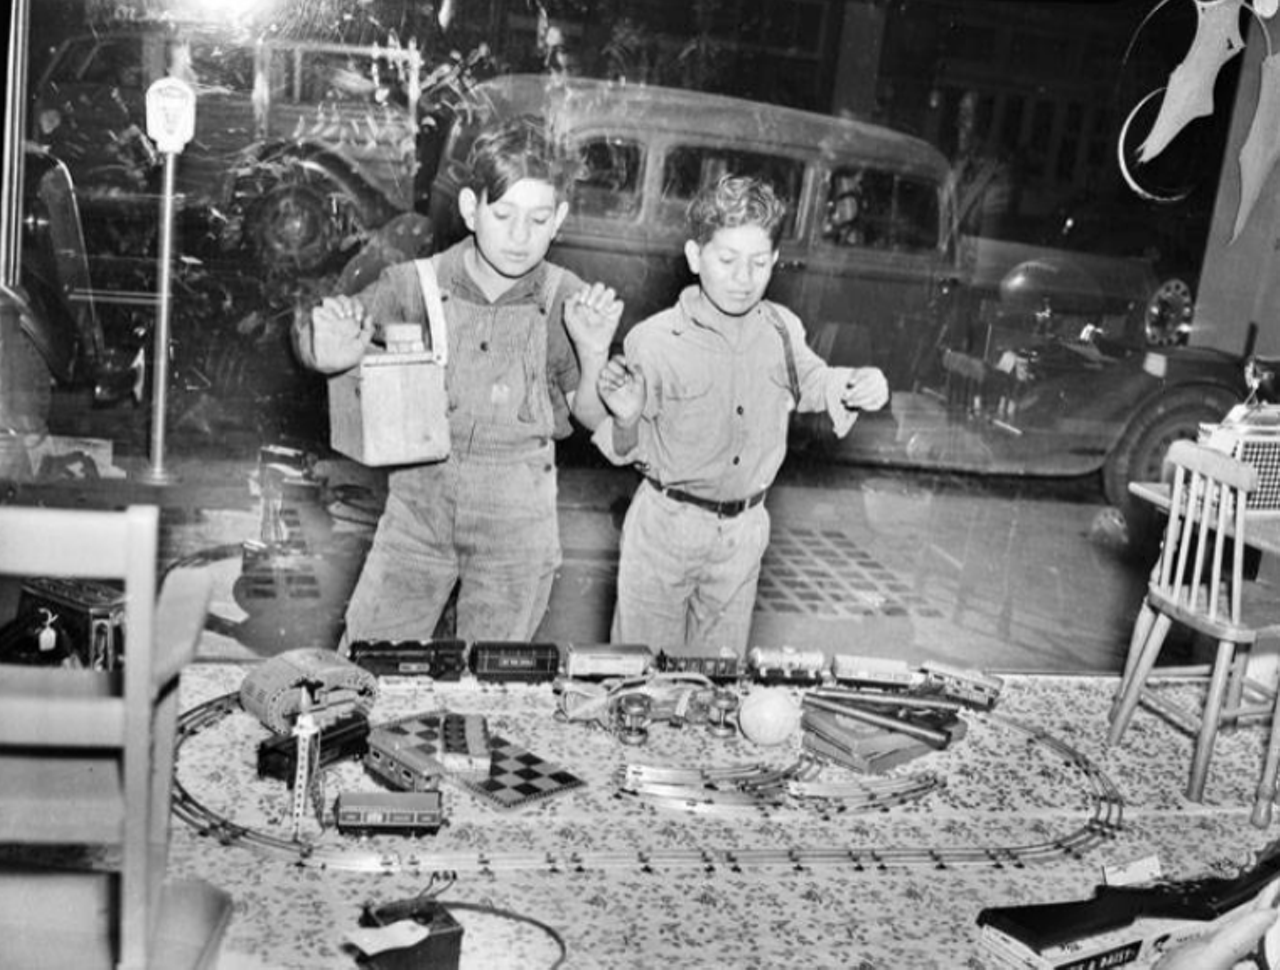 While the days of toys filling window displays may be long gone, you can peep this 1939 photo to relive that era. Here you can see two shoe shine boys (hello, child labor) getting excited about these toys.